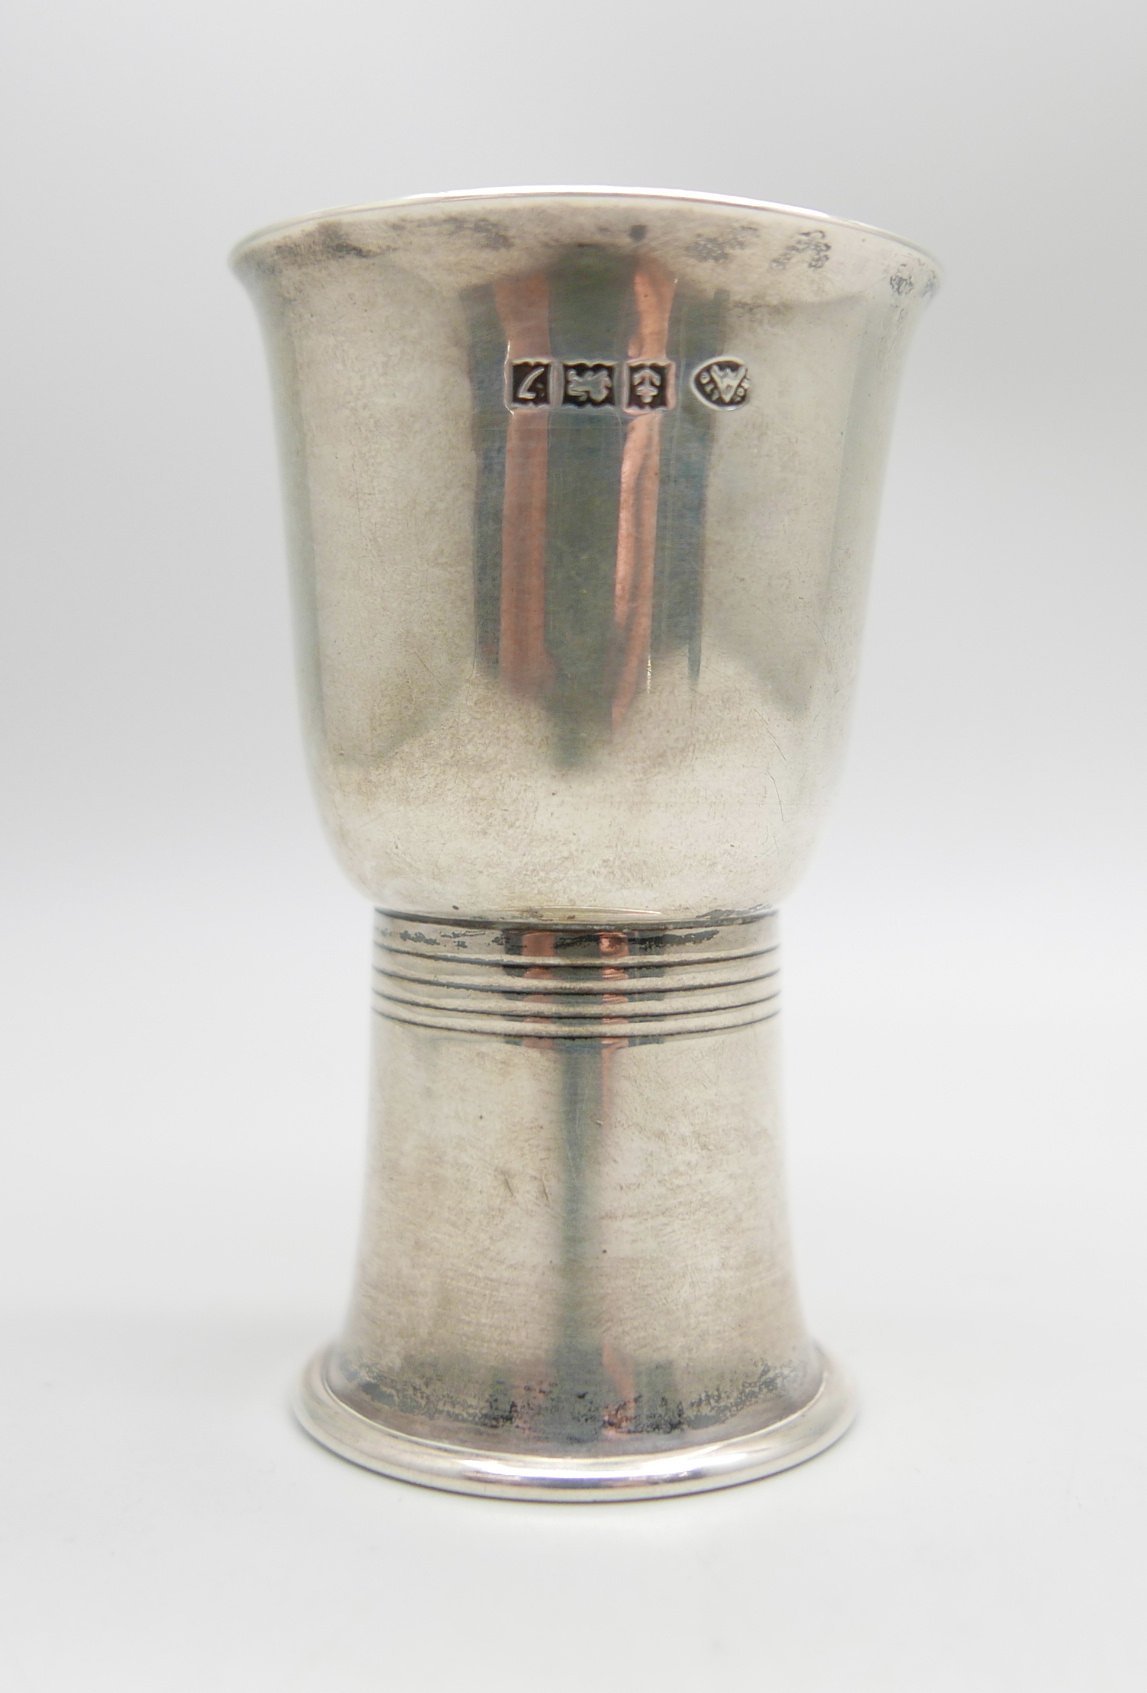 A silver double ended shot measure, Adie Brothers Ltd., Birmingham 1958, 49.1g, 8cm - Image 2 of 3